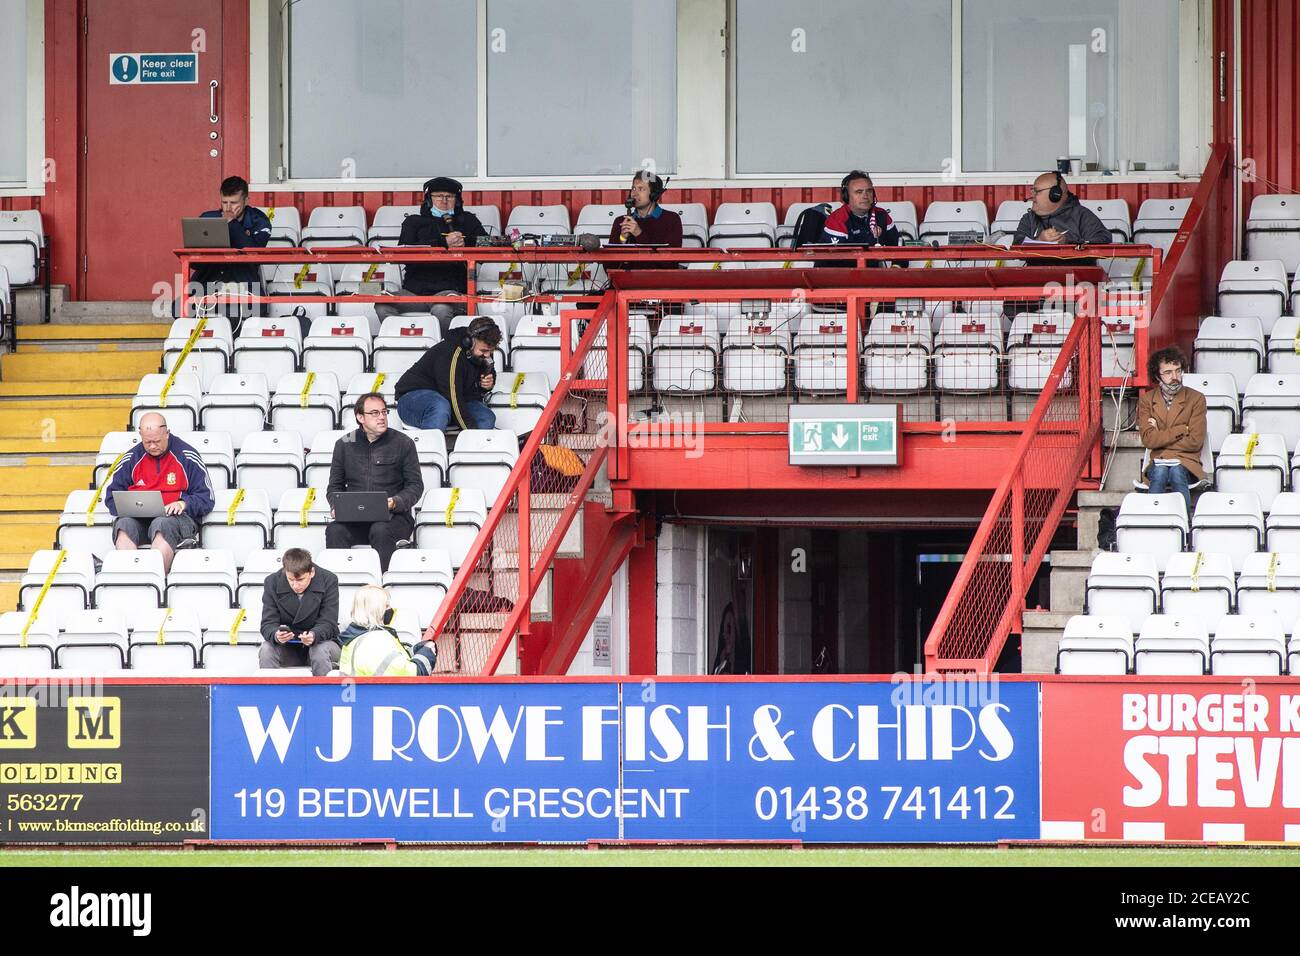 Press and journalists sit in a socially distanced manner during professional football / soccer match during Covid 19 Coronavirus pandemic in UK Stock Photo